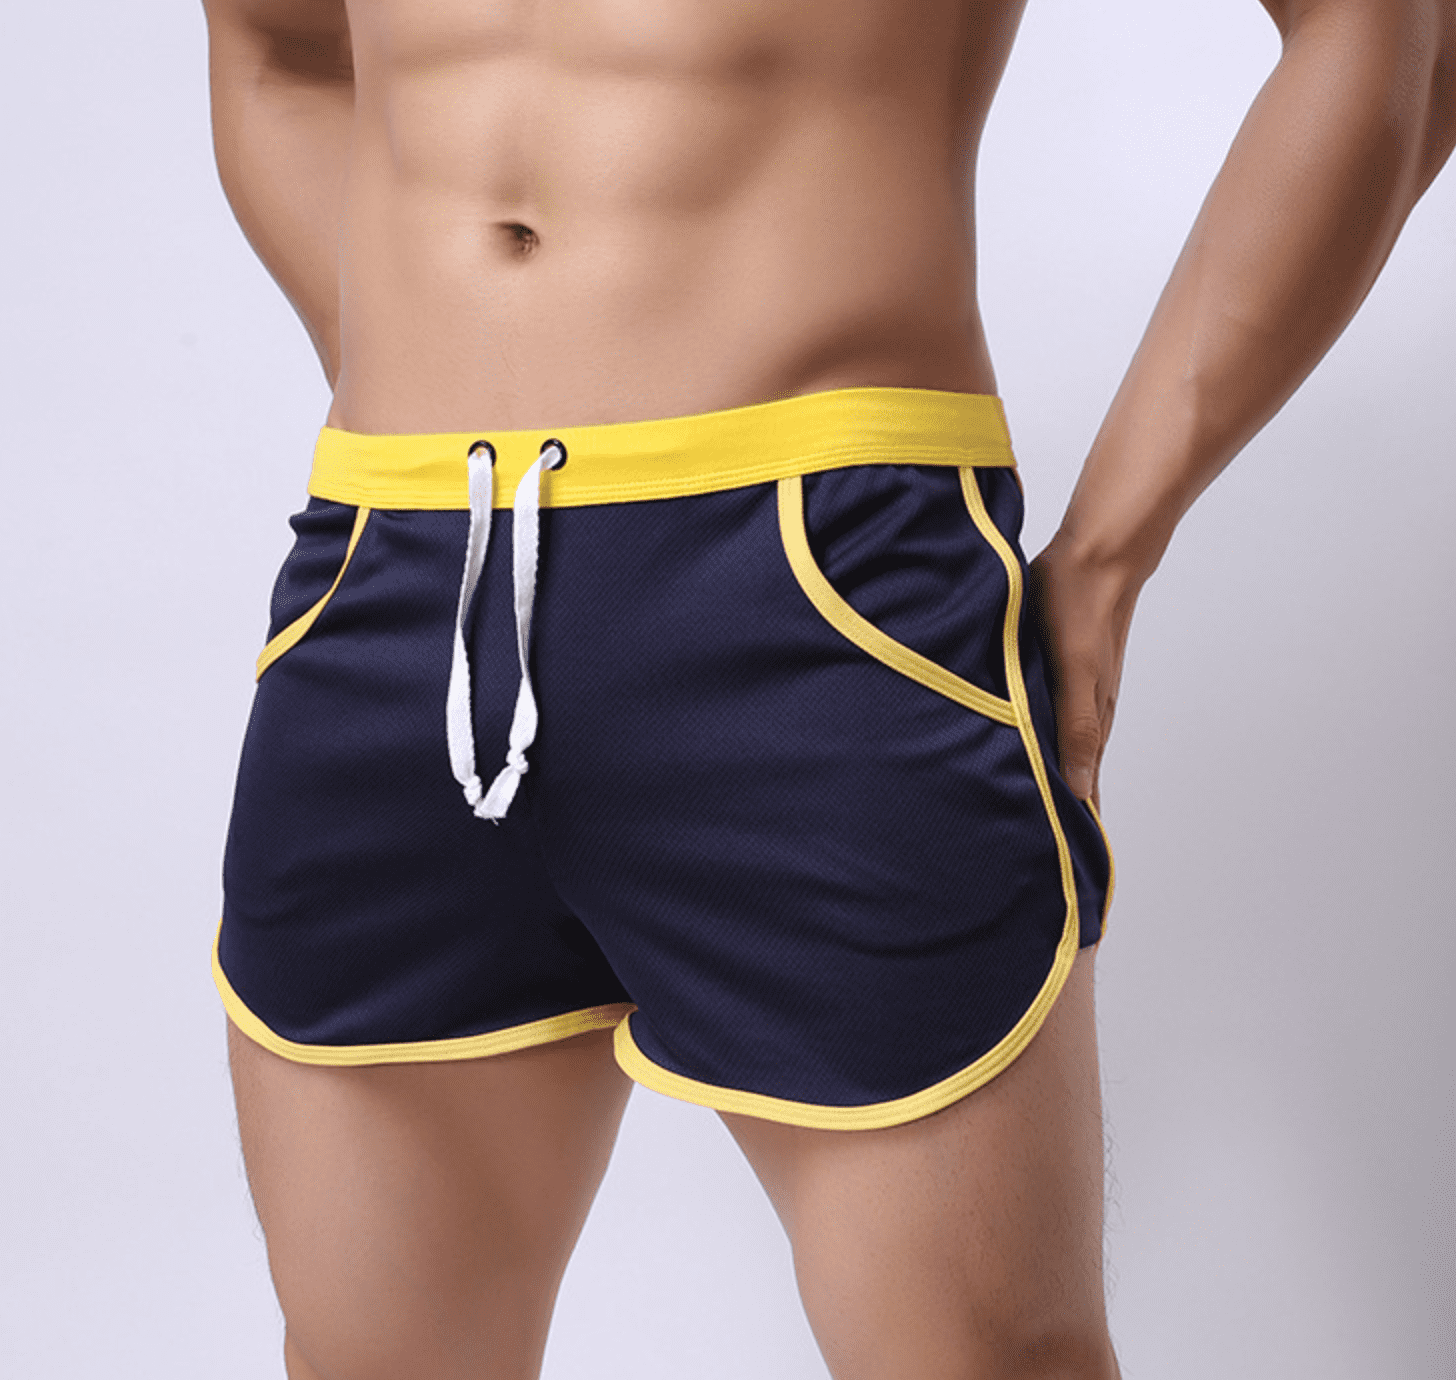 øst Derivation ukuelige Men's 80s Retro Gym Fitness Shorts for Running, Workout, Bodybuilding &  Casual Style - Walmart.com